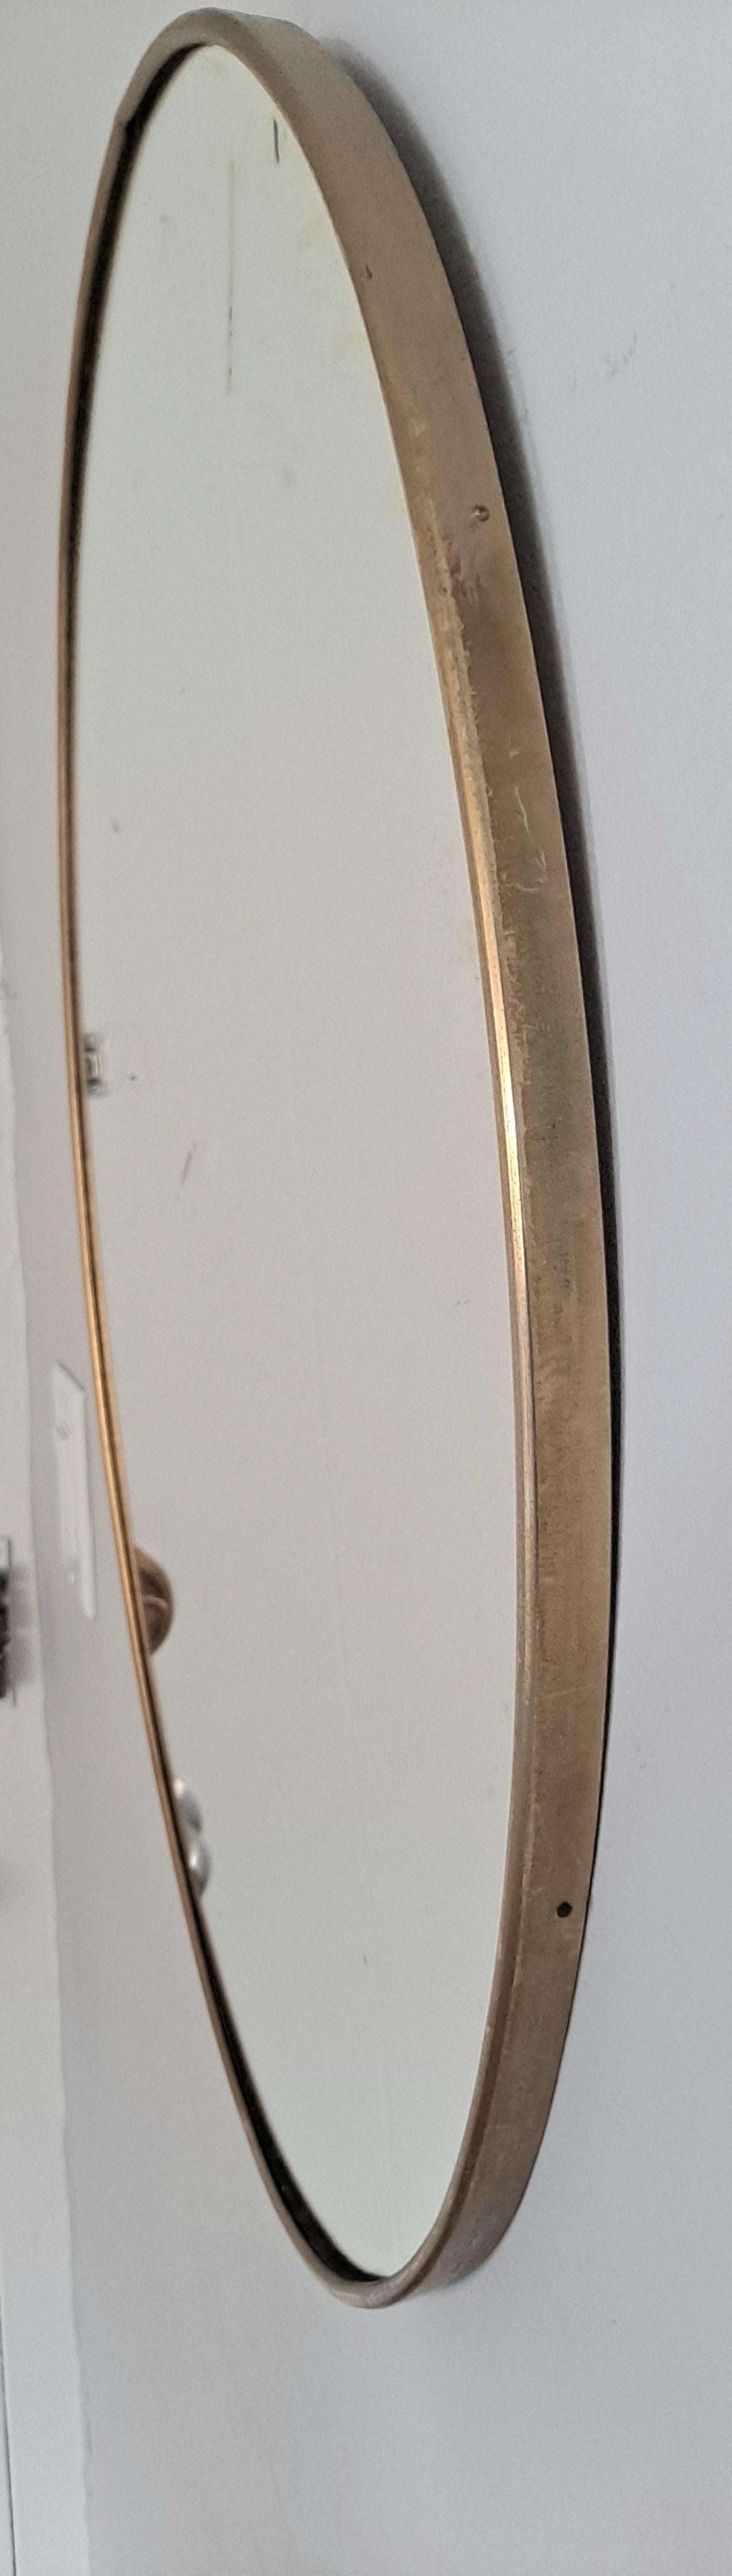 Wall brass mirror on the wood backing.